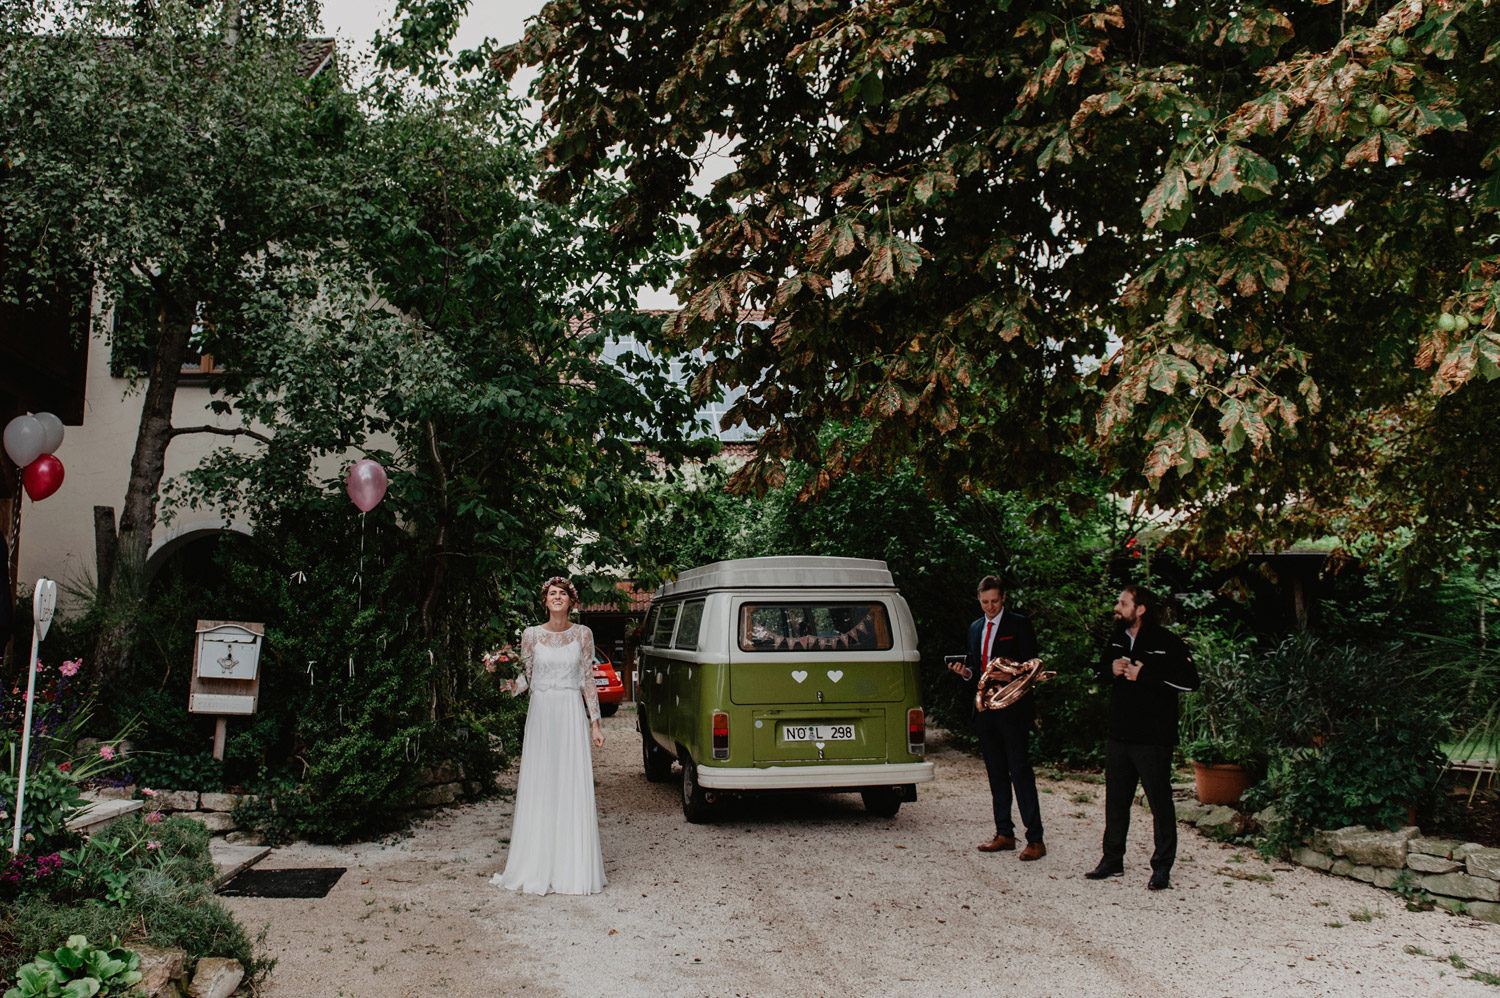 bride in modern elfenkleid wedding dress with lace top and flower crown laughing in front of VW wedding car